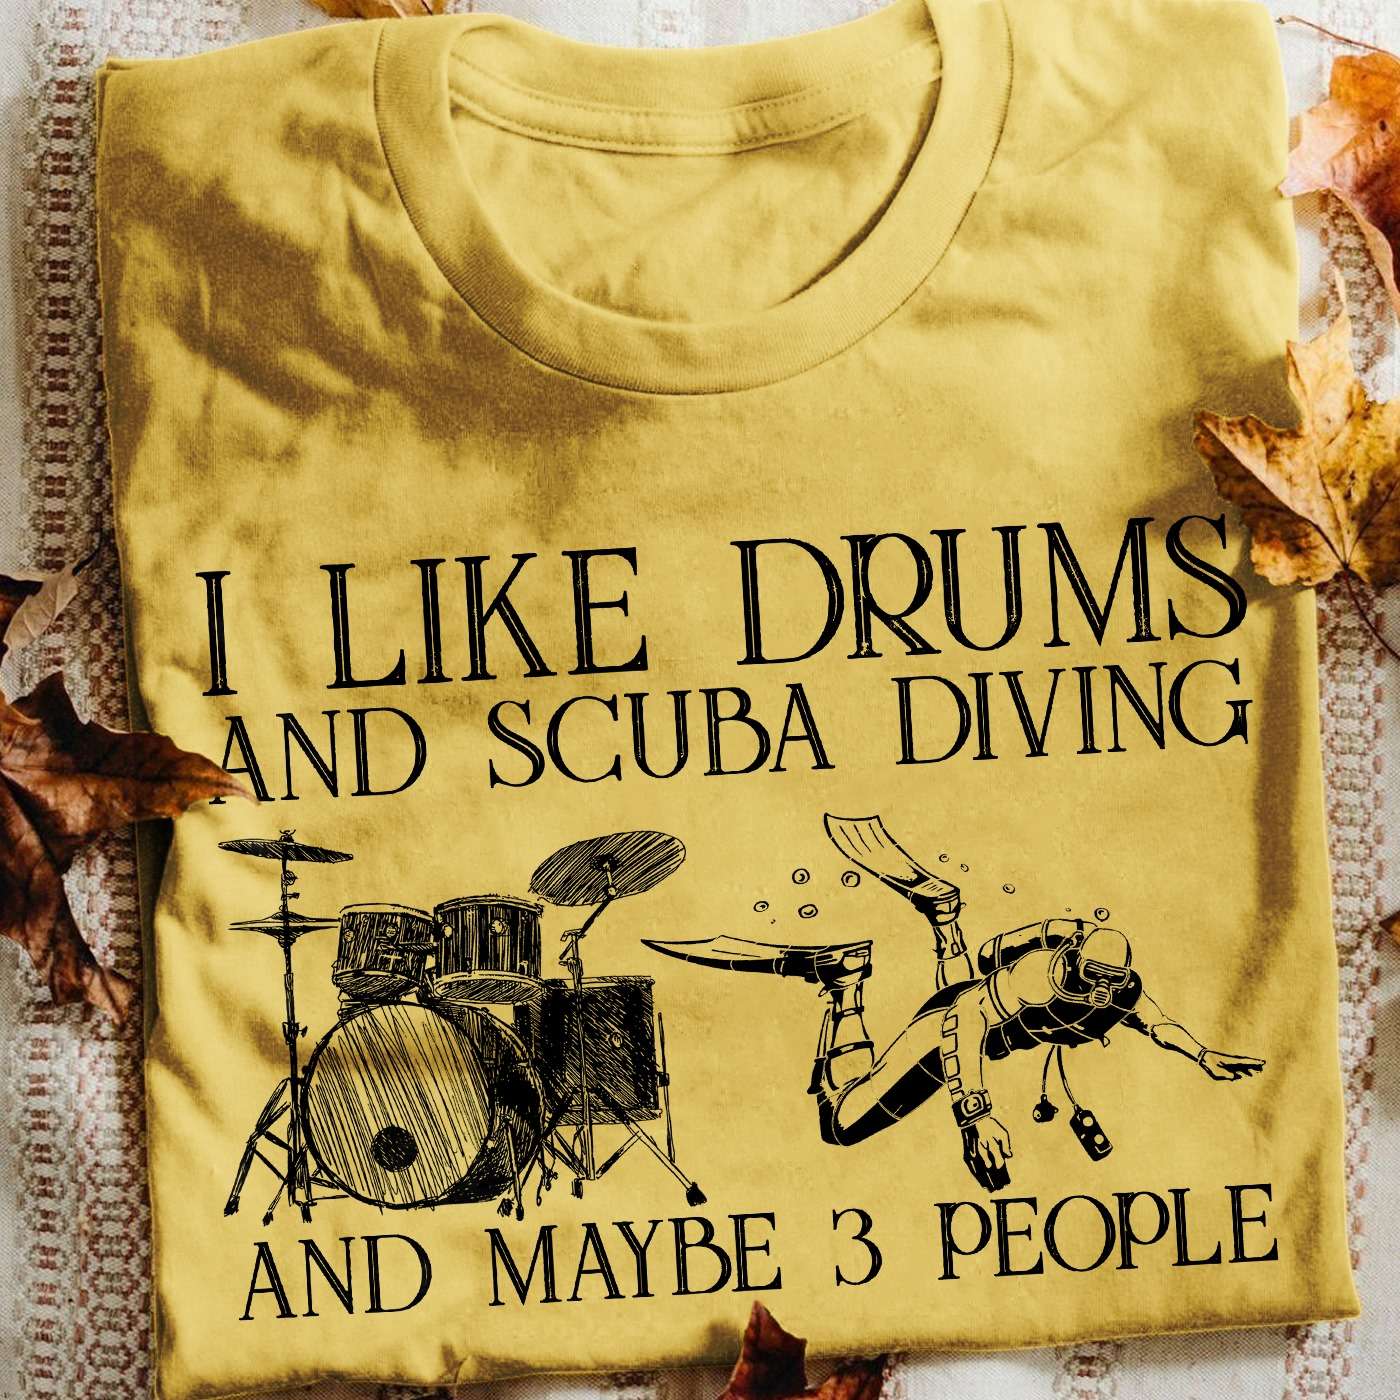 I like drums and scuba diving and maybe 3 people